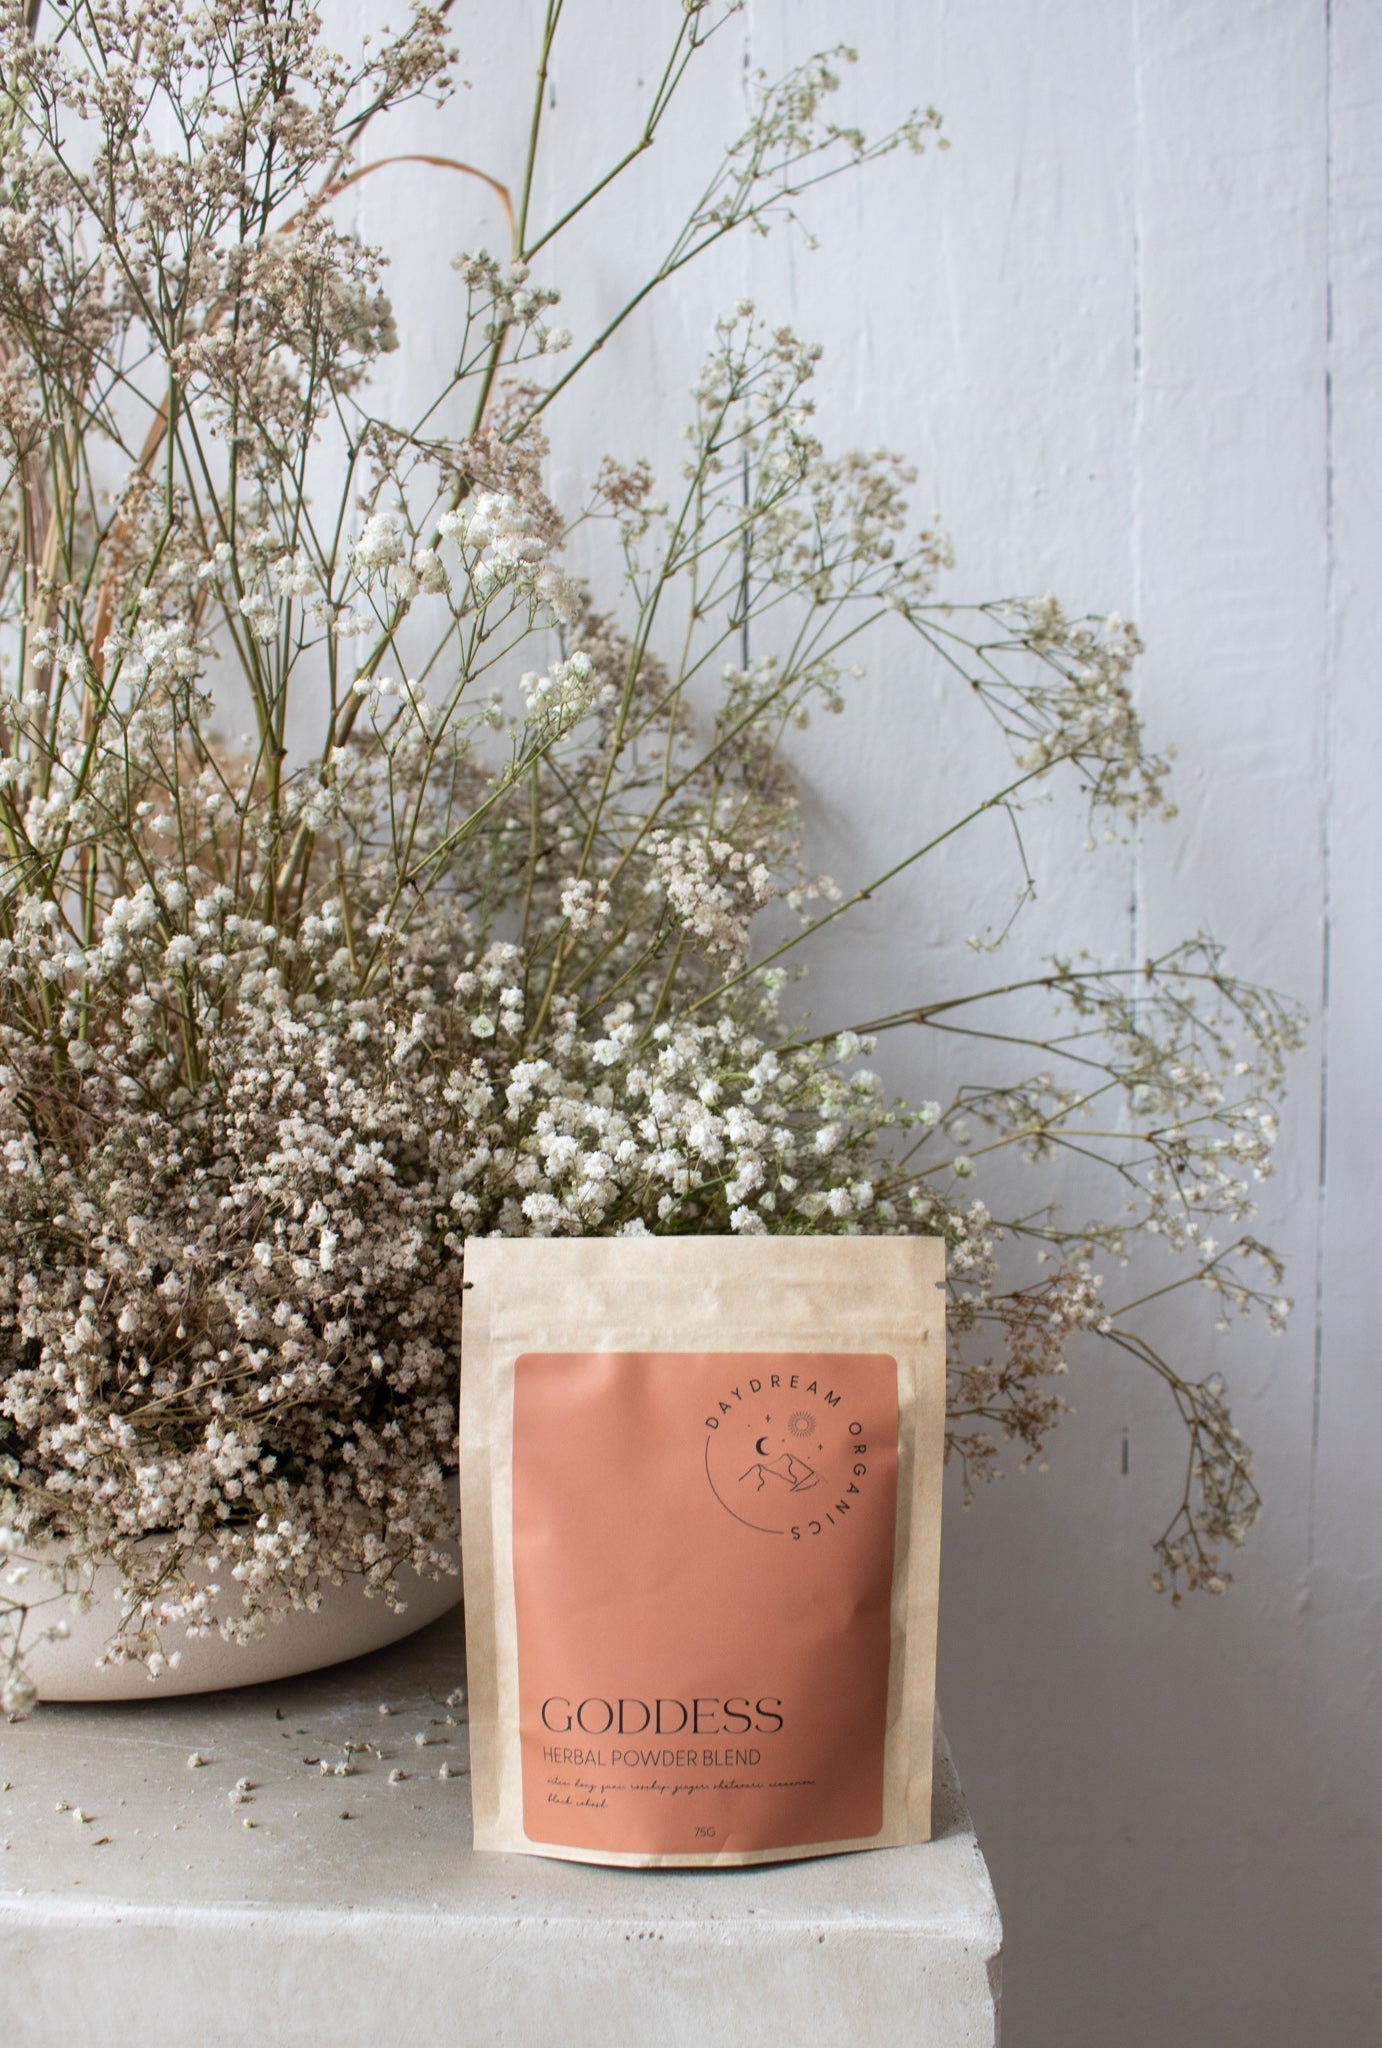 Say hello to your inner goddess with our Goddess herbal powder blend which has been formualted to help naturally balance hormone levels, balance your menstrual cycle, relieve menopause symptoms, and ease common PMS symptoms. 